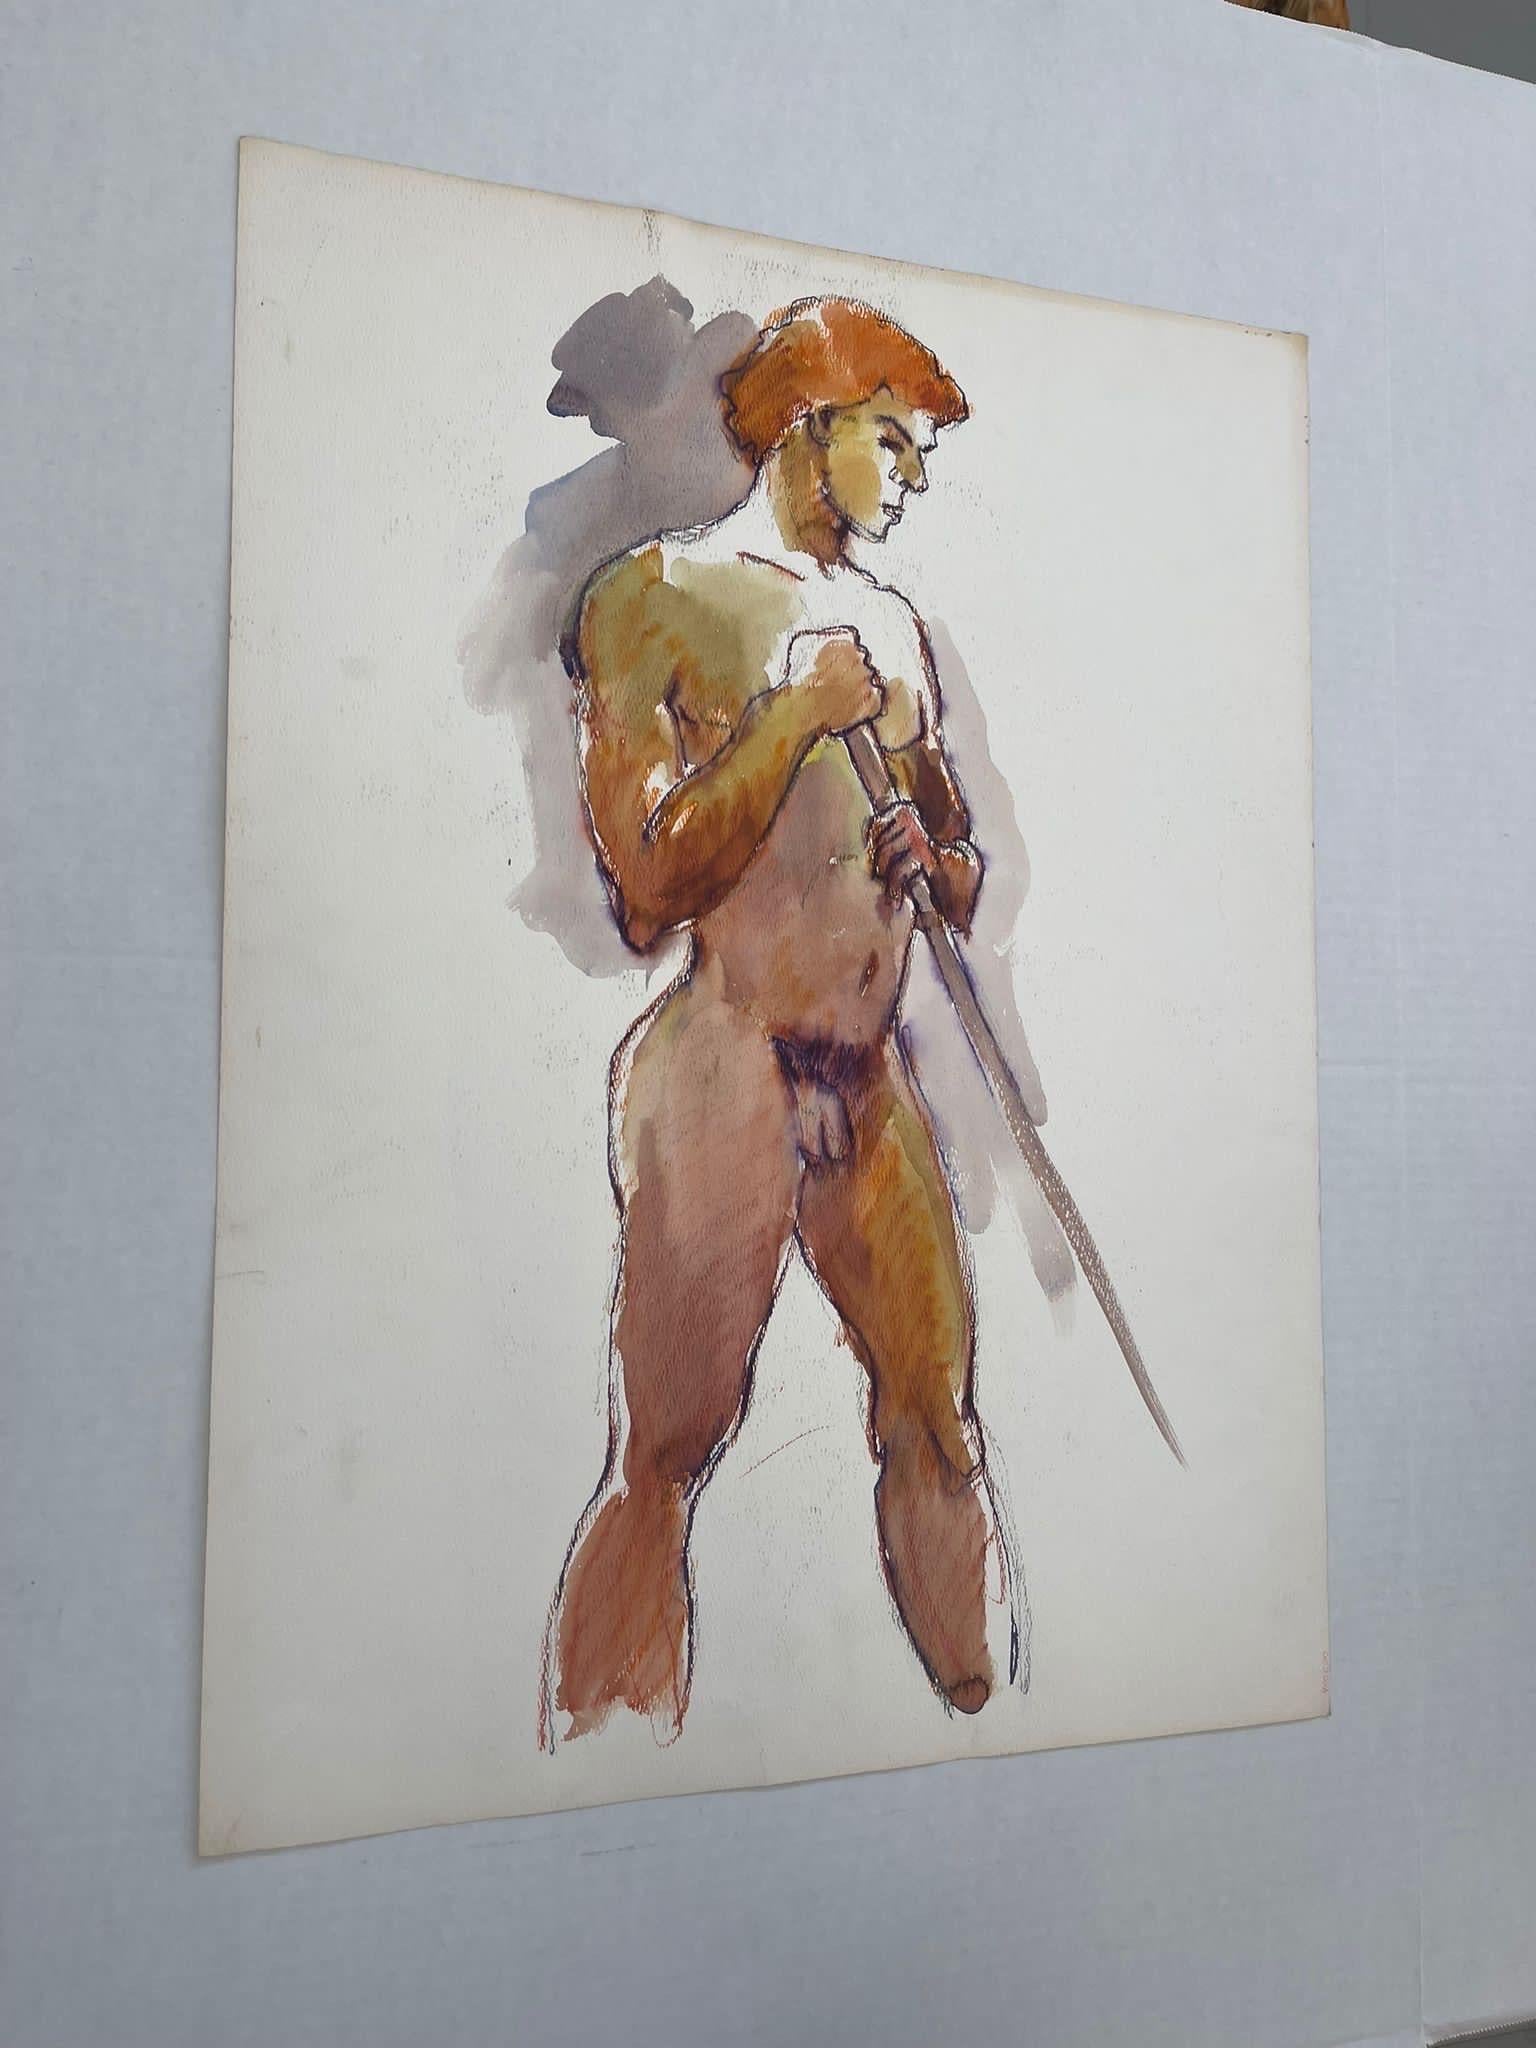 Abstract Portrait of a Nude Man. Possibly Watercolor and Pastel On Paper. Signed J.P. Gaston as Pictured. Vintage Condition Consistent with Age.

Dimensions. 18 W ; 1/8 D ; 24 H